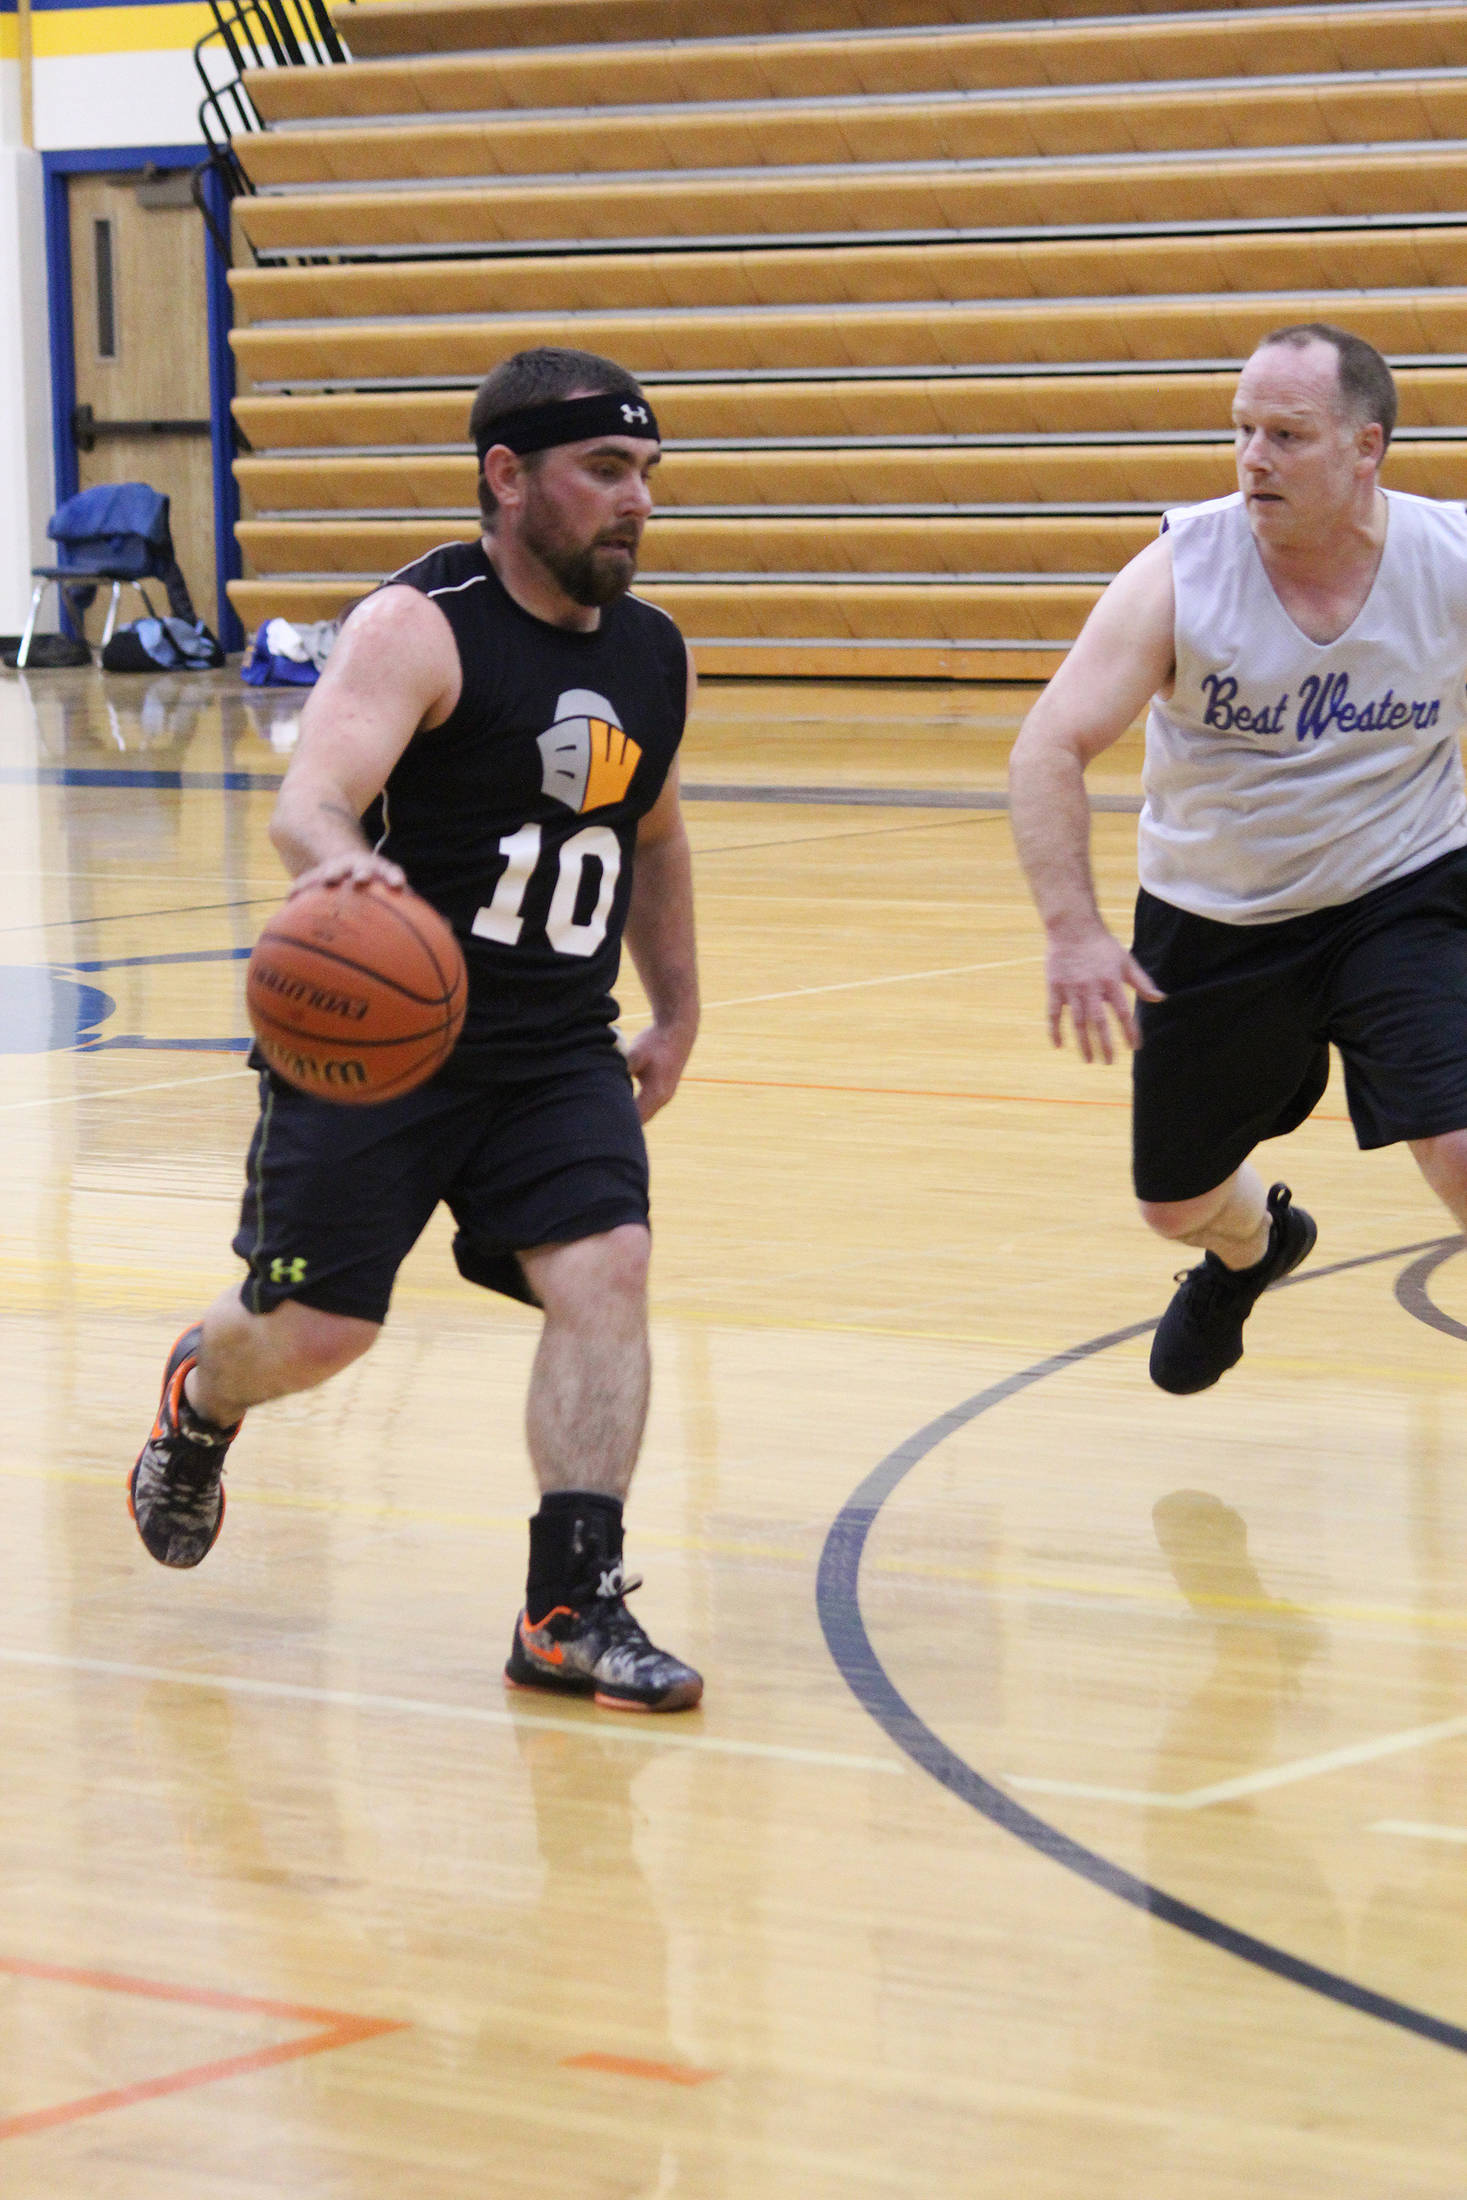 David Drake (left) dribbles past Heath Smith during the Homer city basketball league’s championship game Monday, March 5, 2018 at Homer High School. (Photo by Megan Pacer/Homer News)